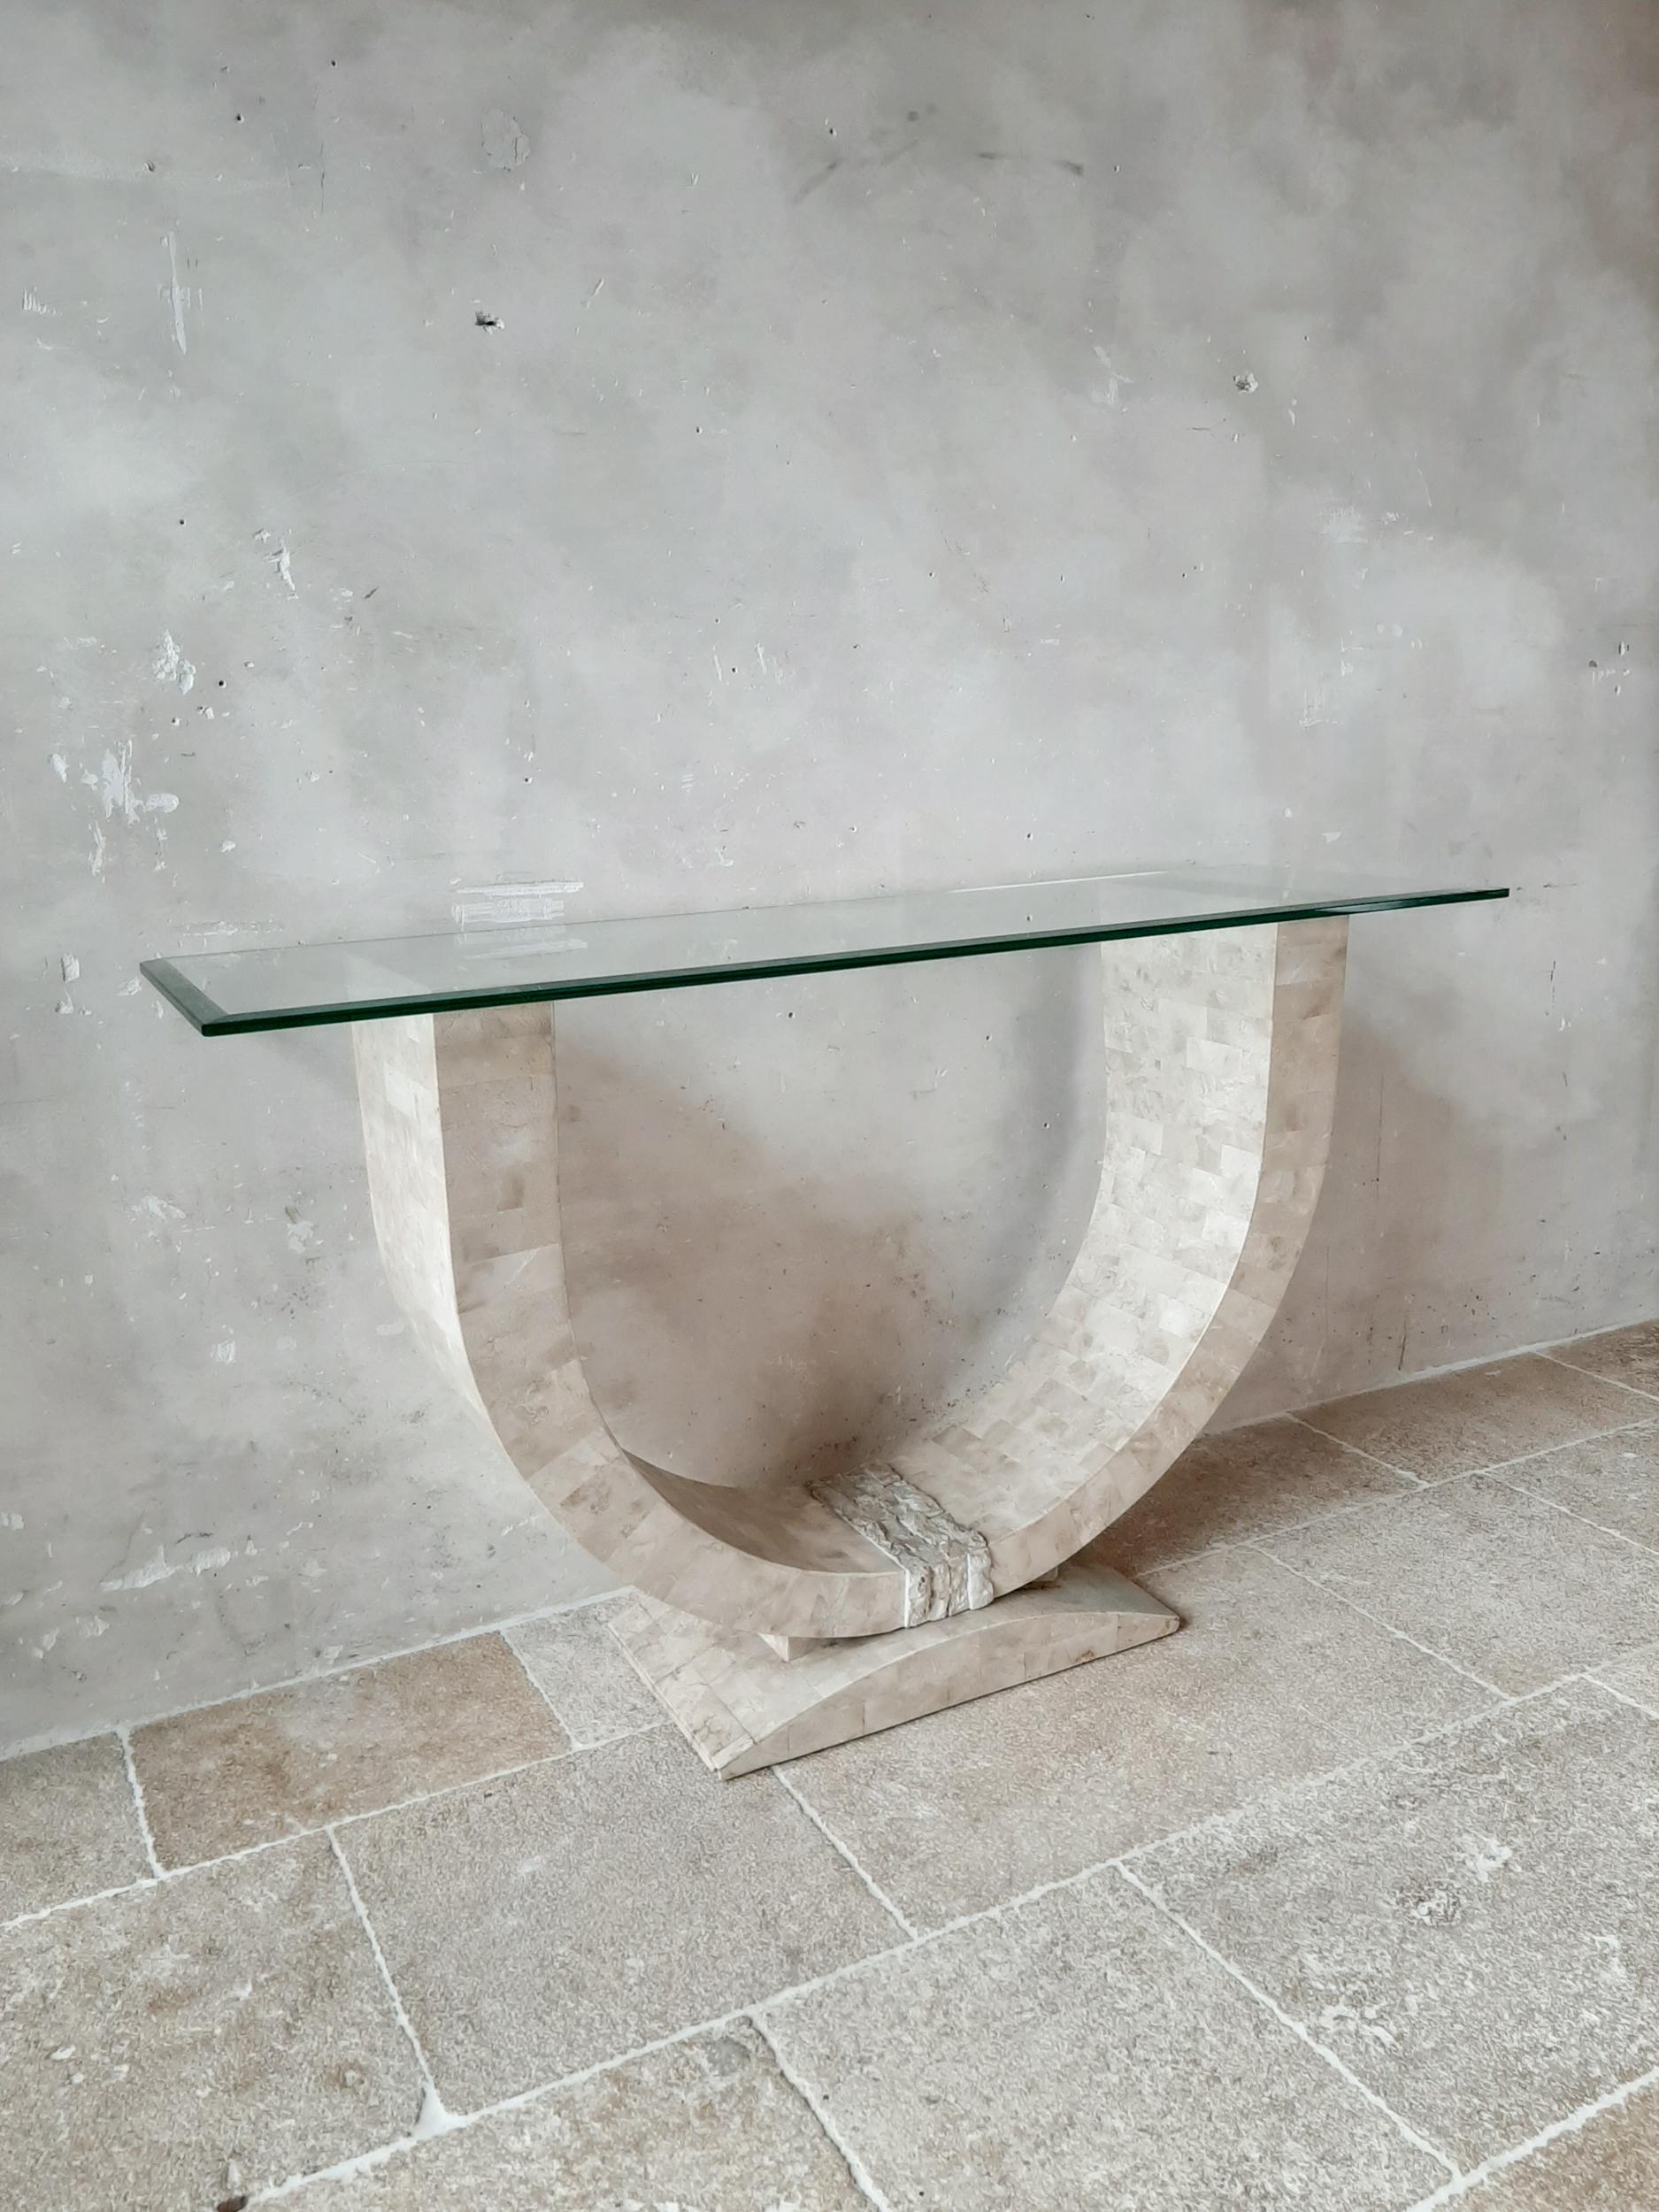 Maitland Smith designer tesselated console table with a bevelled glass top. The base is with travertine veneered wood which makes the piece movable. 

Dimensions: H 81 x W 135.5 x D 40 cm.
 